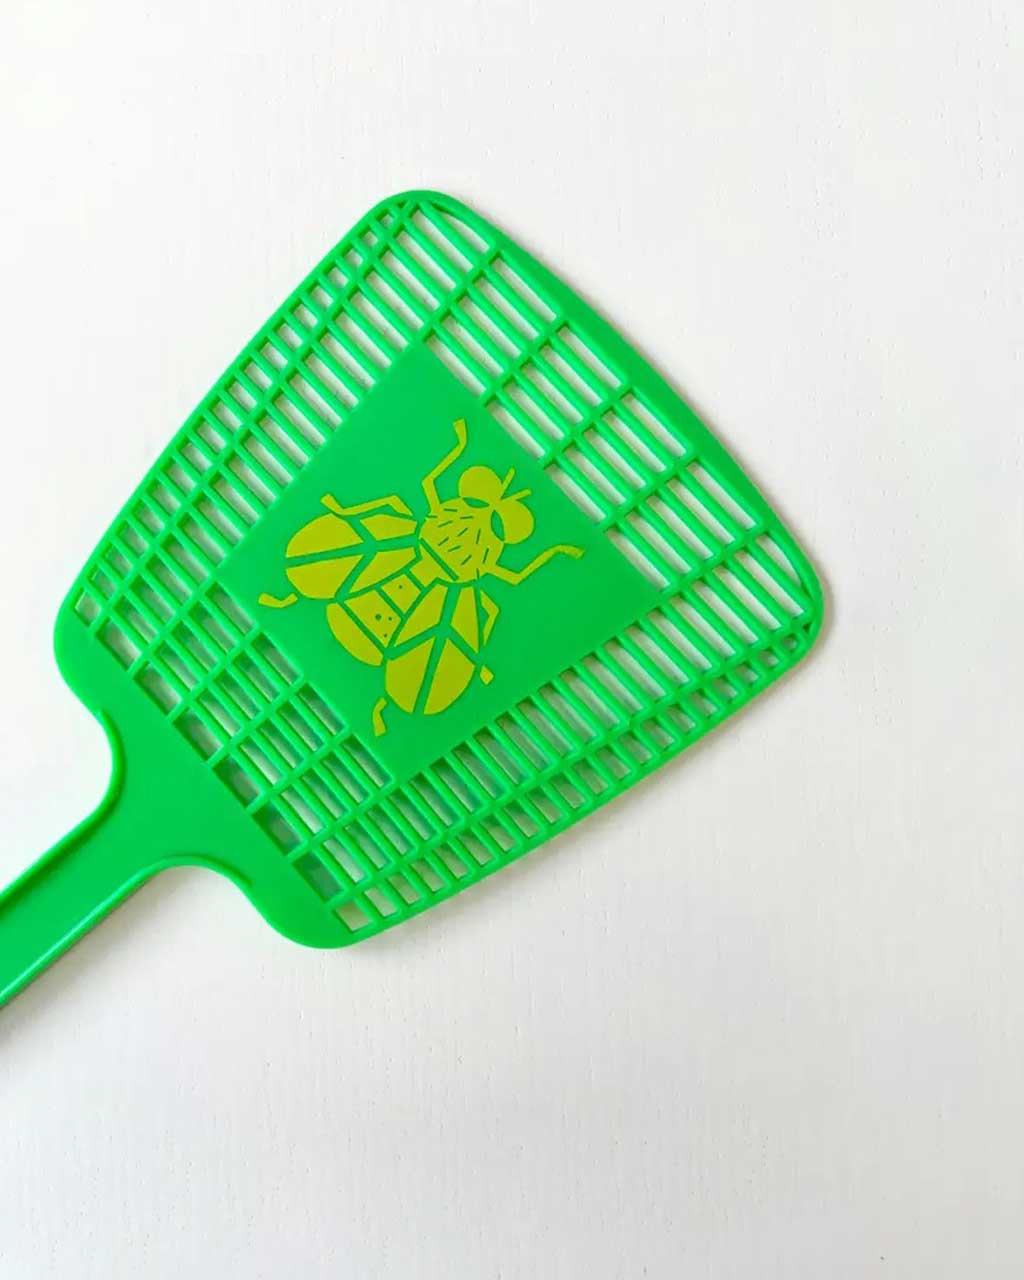 up close of green fly swatter with yellow fly logo in the middle